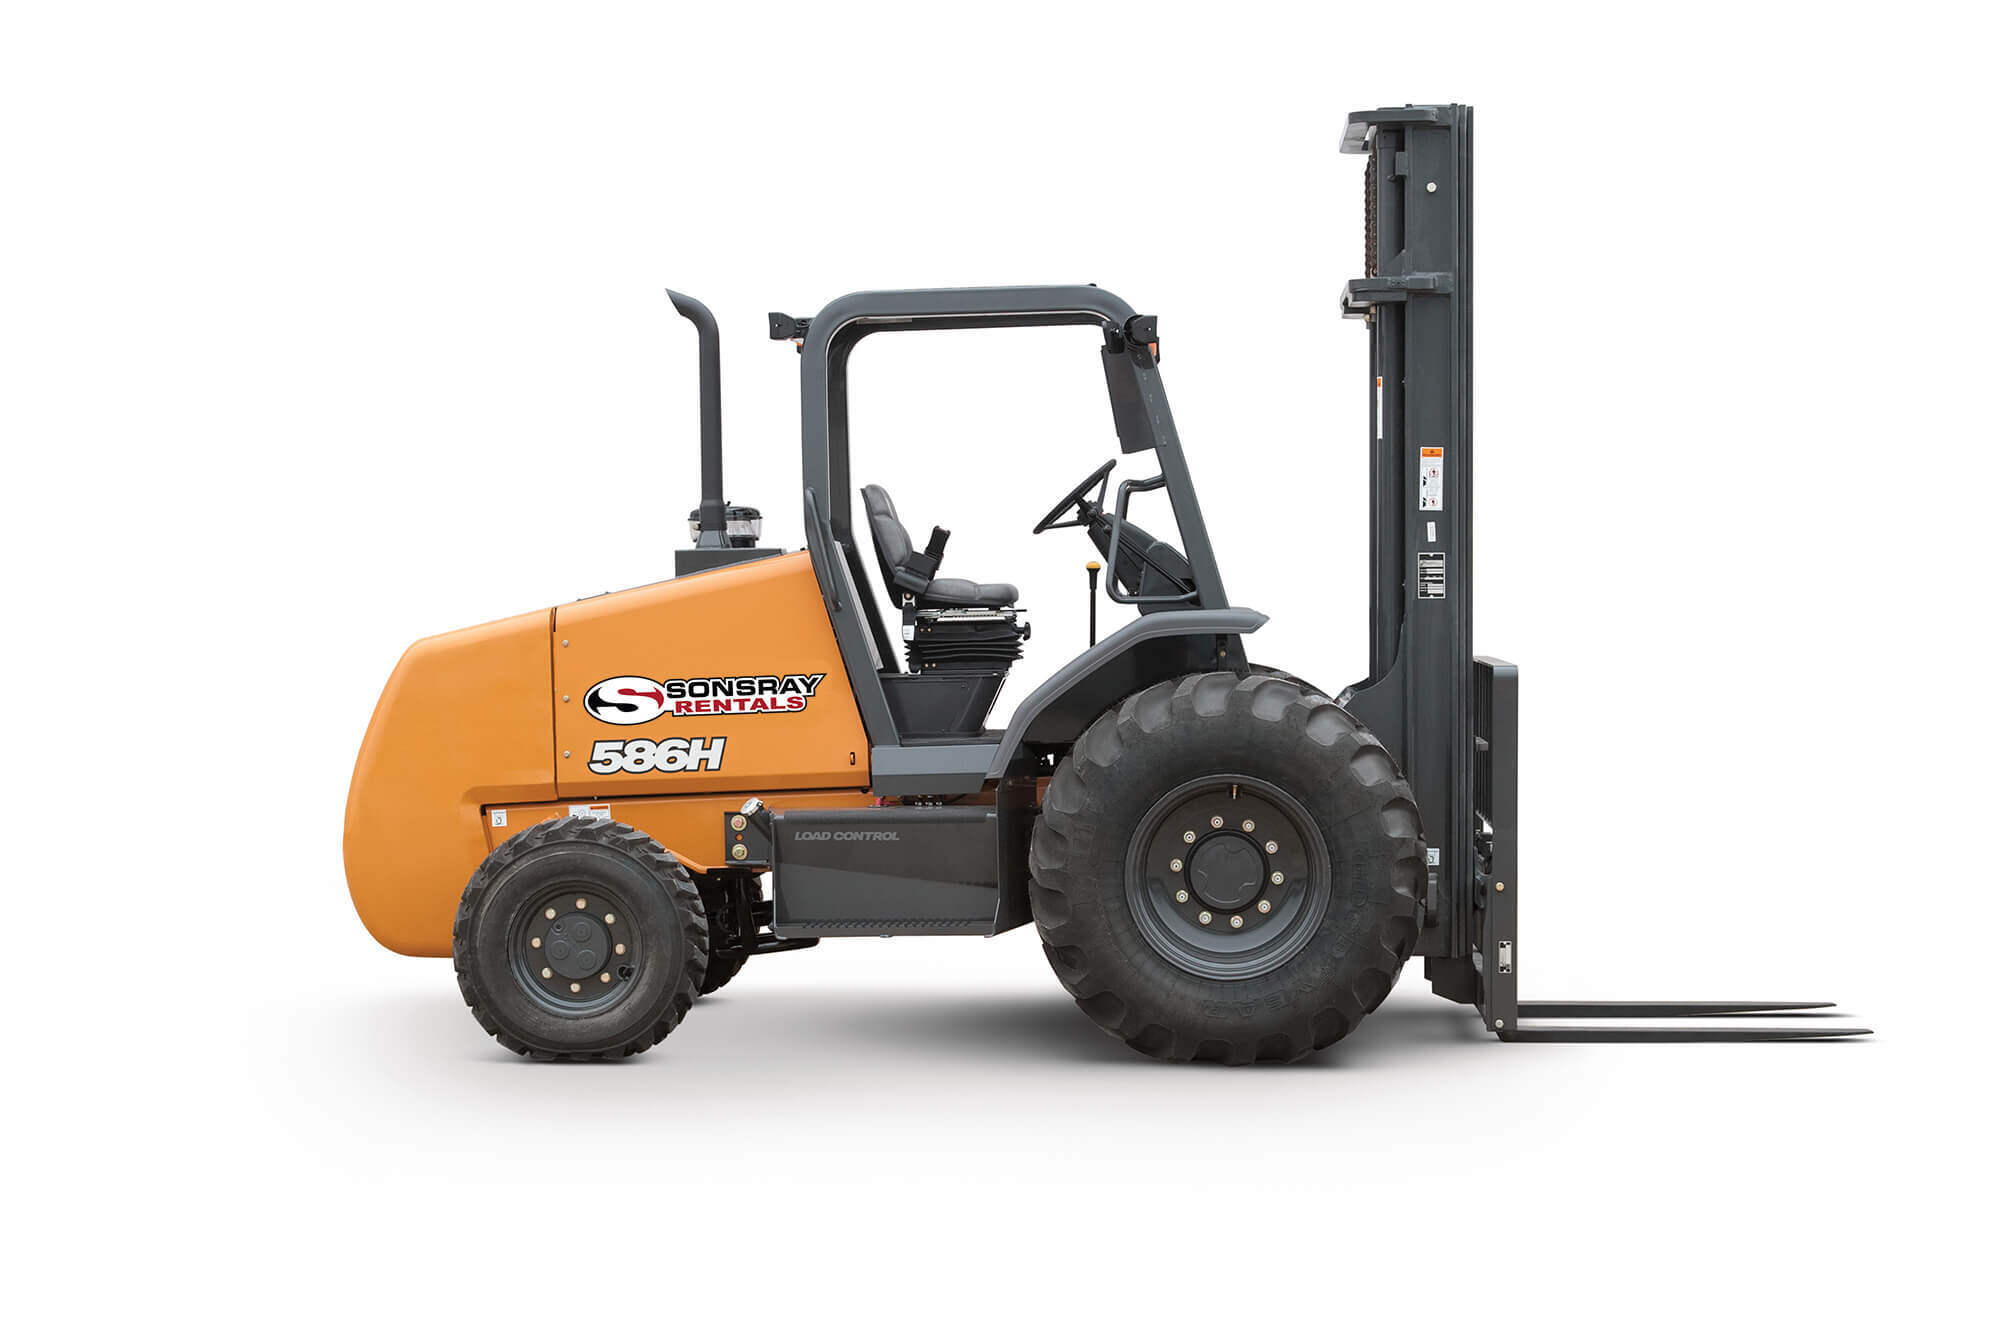 Case Rough Terrain Forklift For Rent Or Sale 586h Sonsray Machinery Rentals